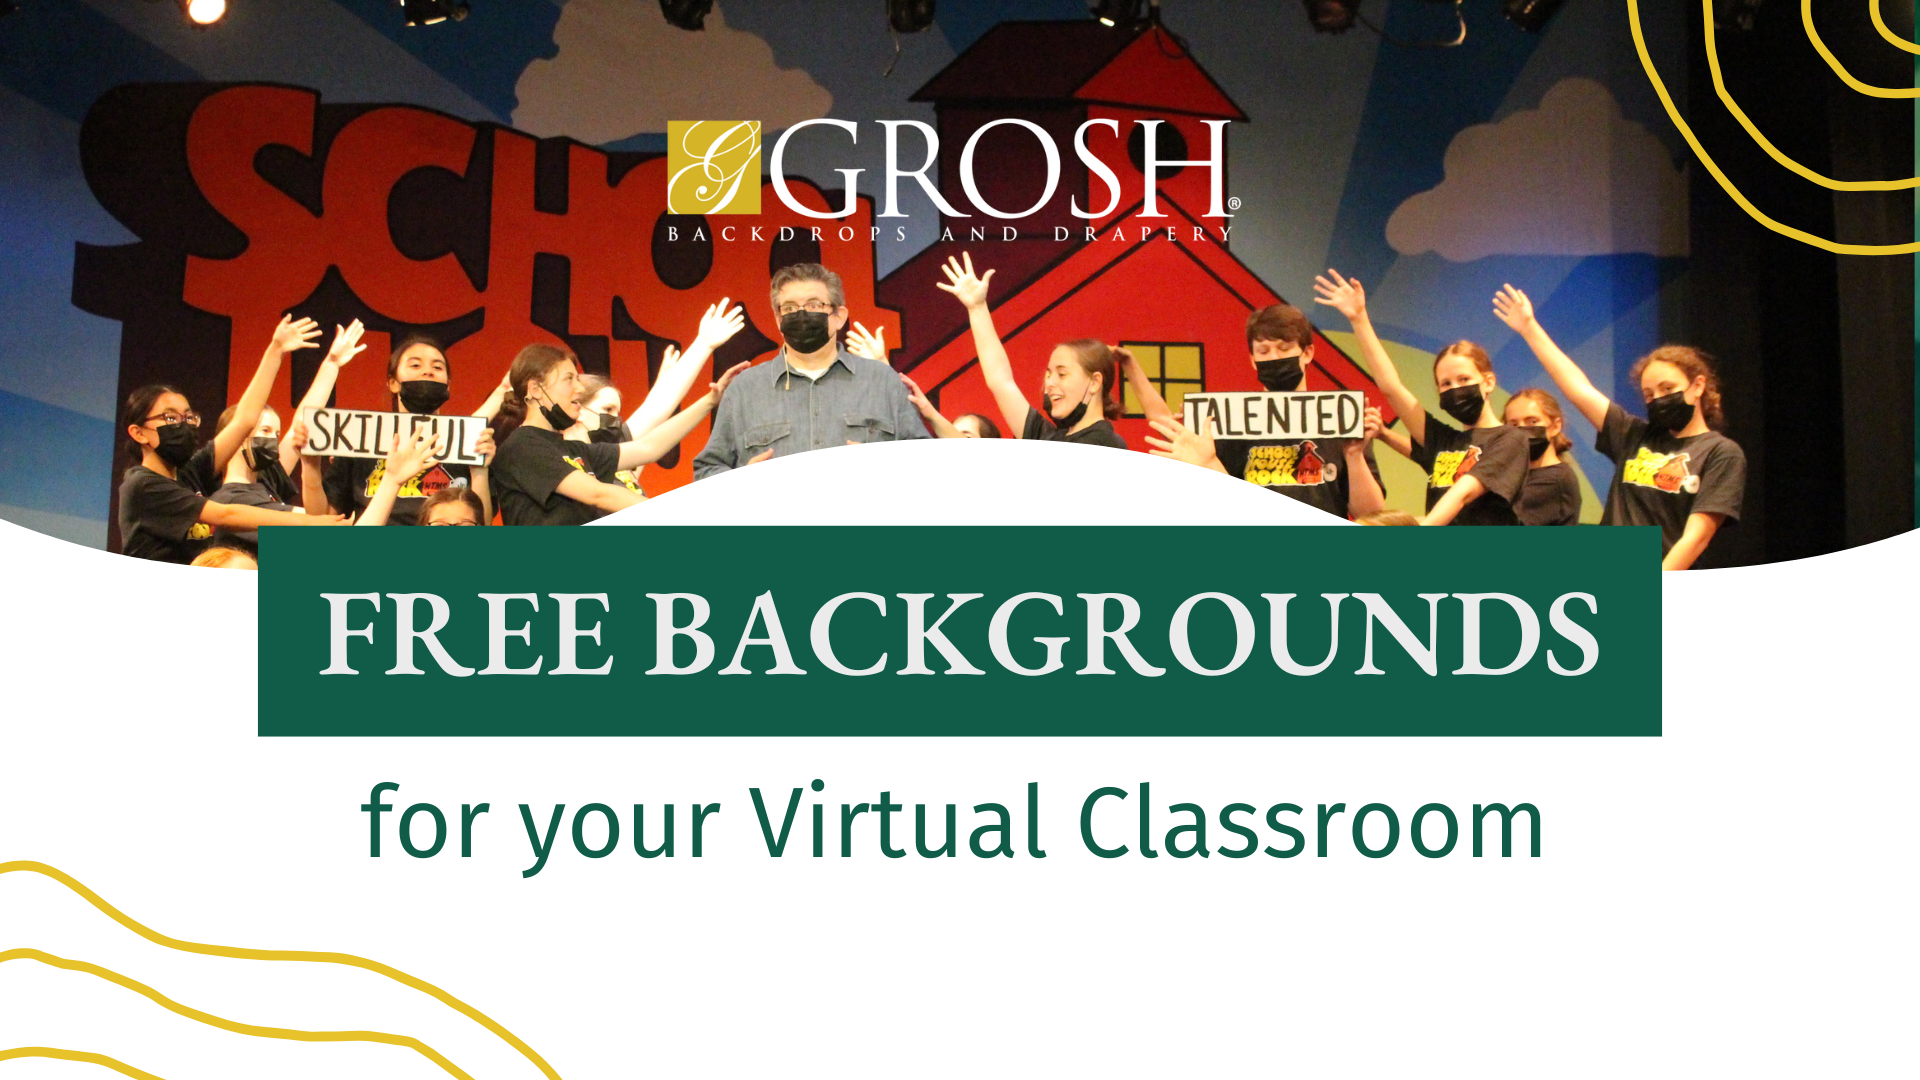 FREE Backgrounds for your Virtual Classroom